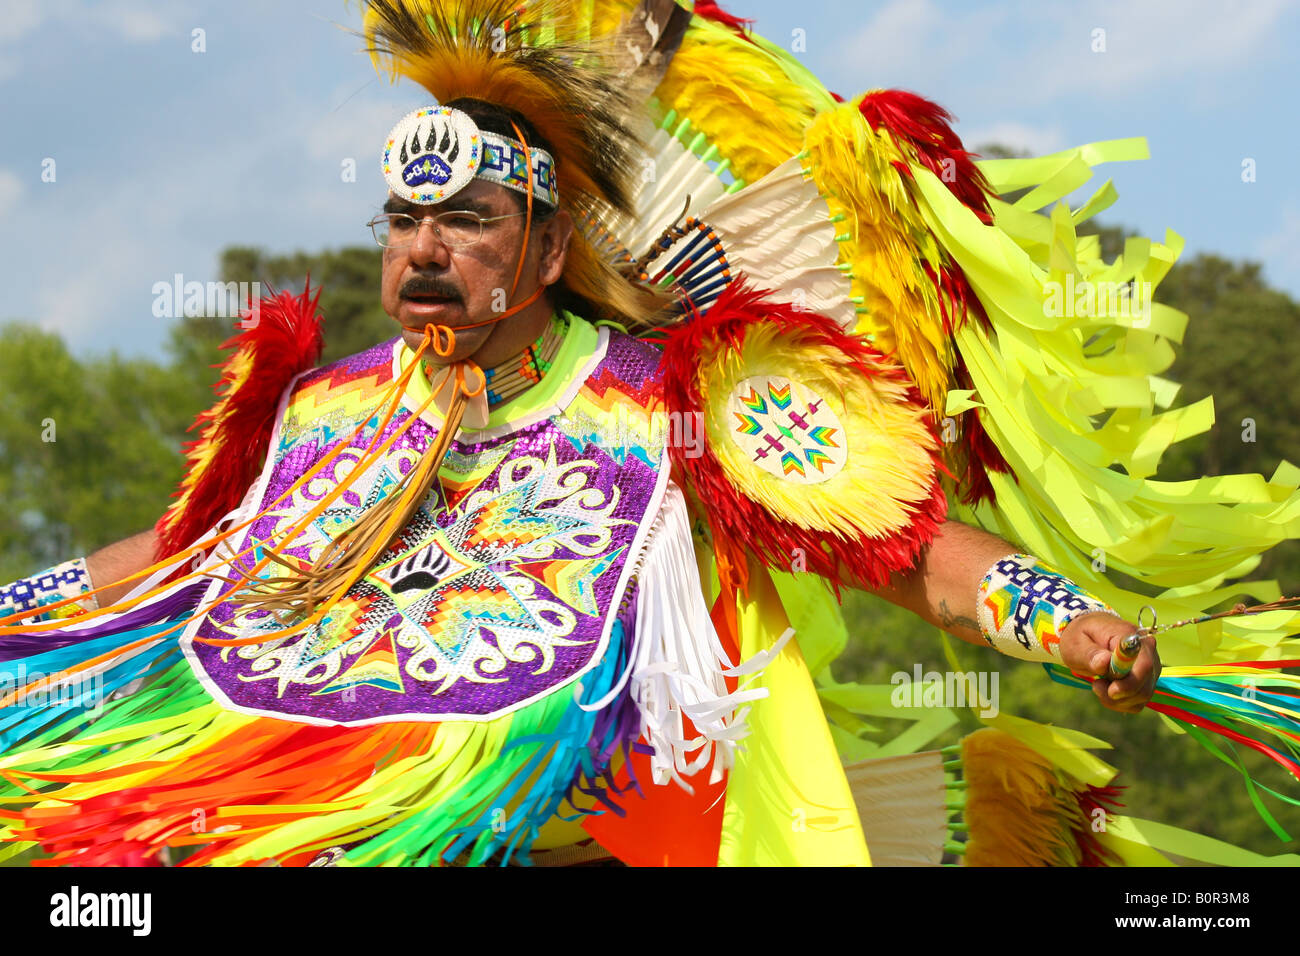 Native American dancer at the 8th Annual Red Wing Native American PowWow in Virginia Beach, Virginia Stock Photo